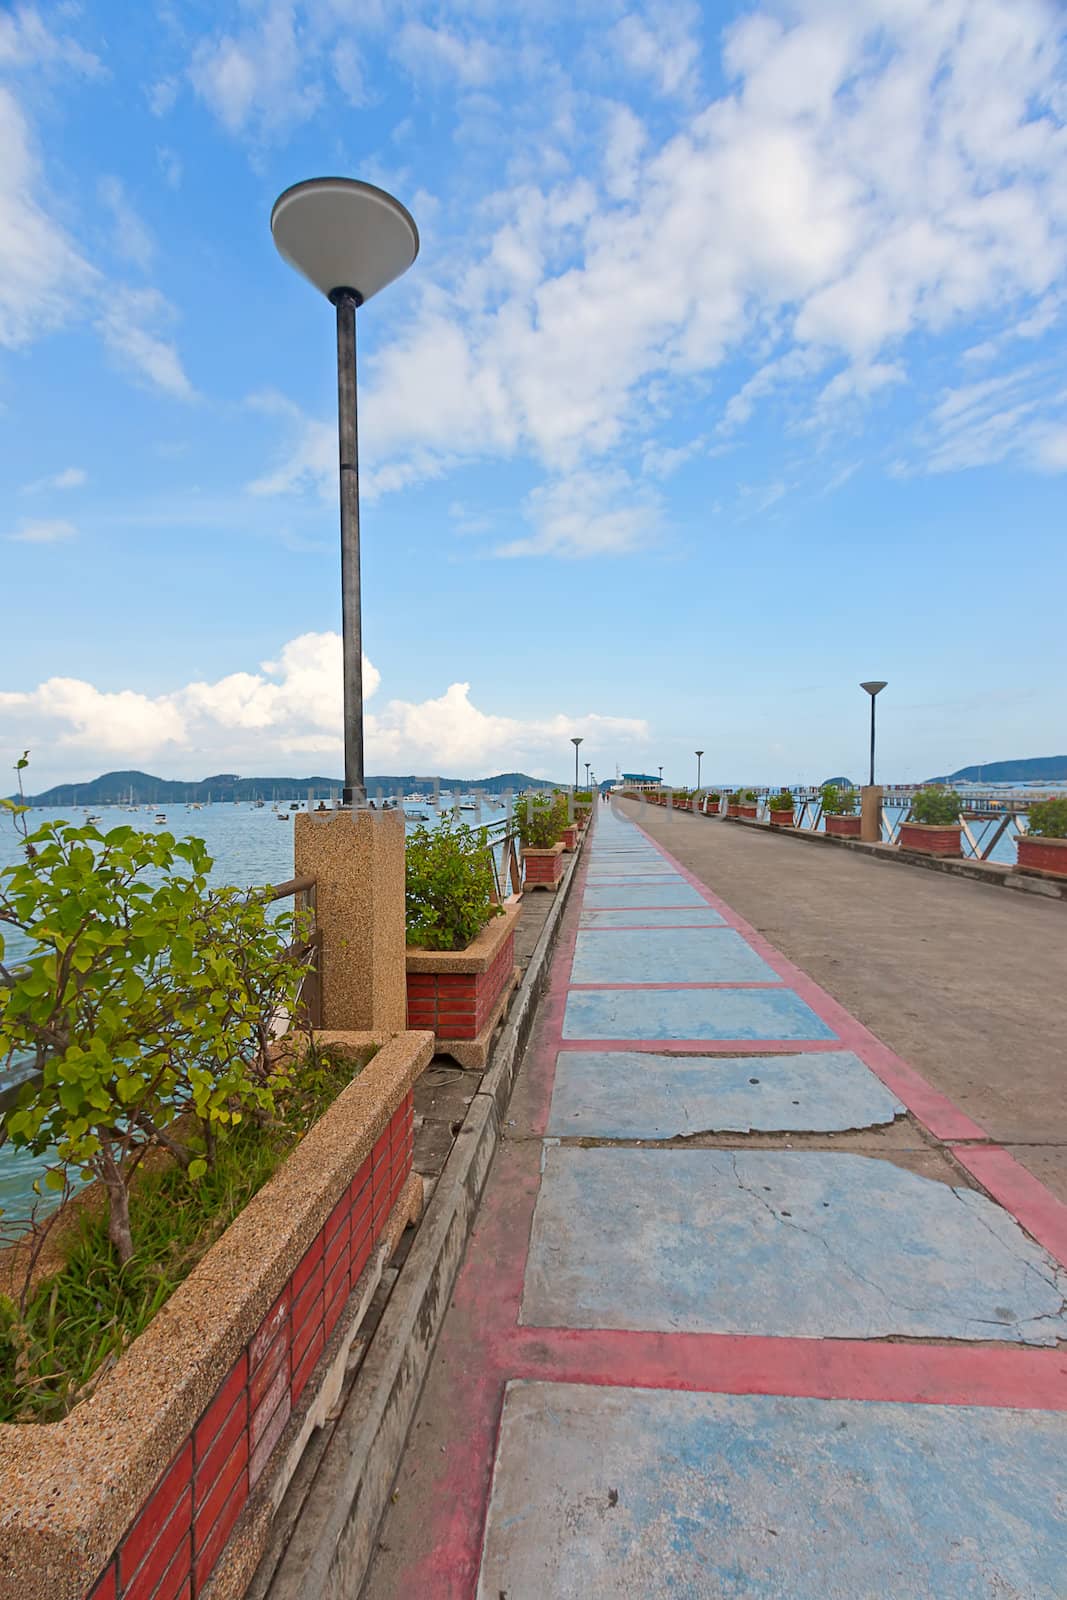 Berth with flower beds and lanterns on background blue sky, Thailand.